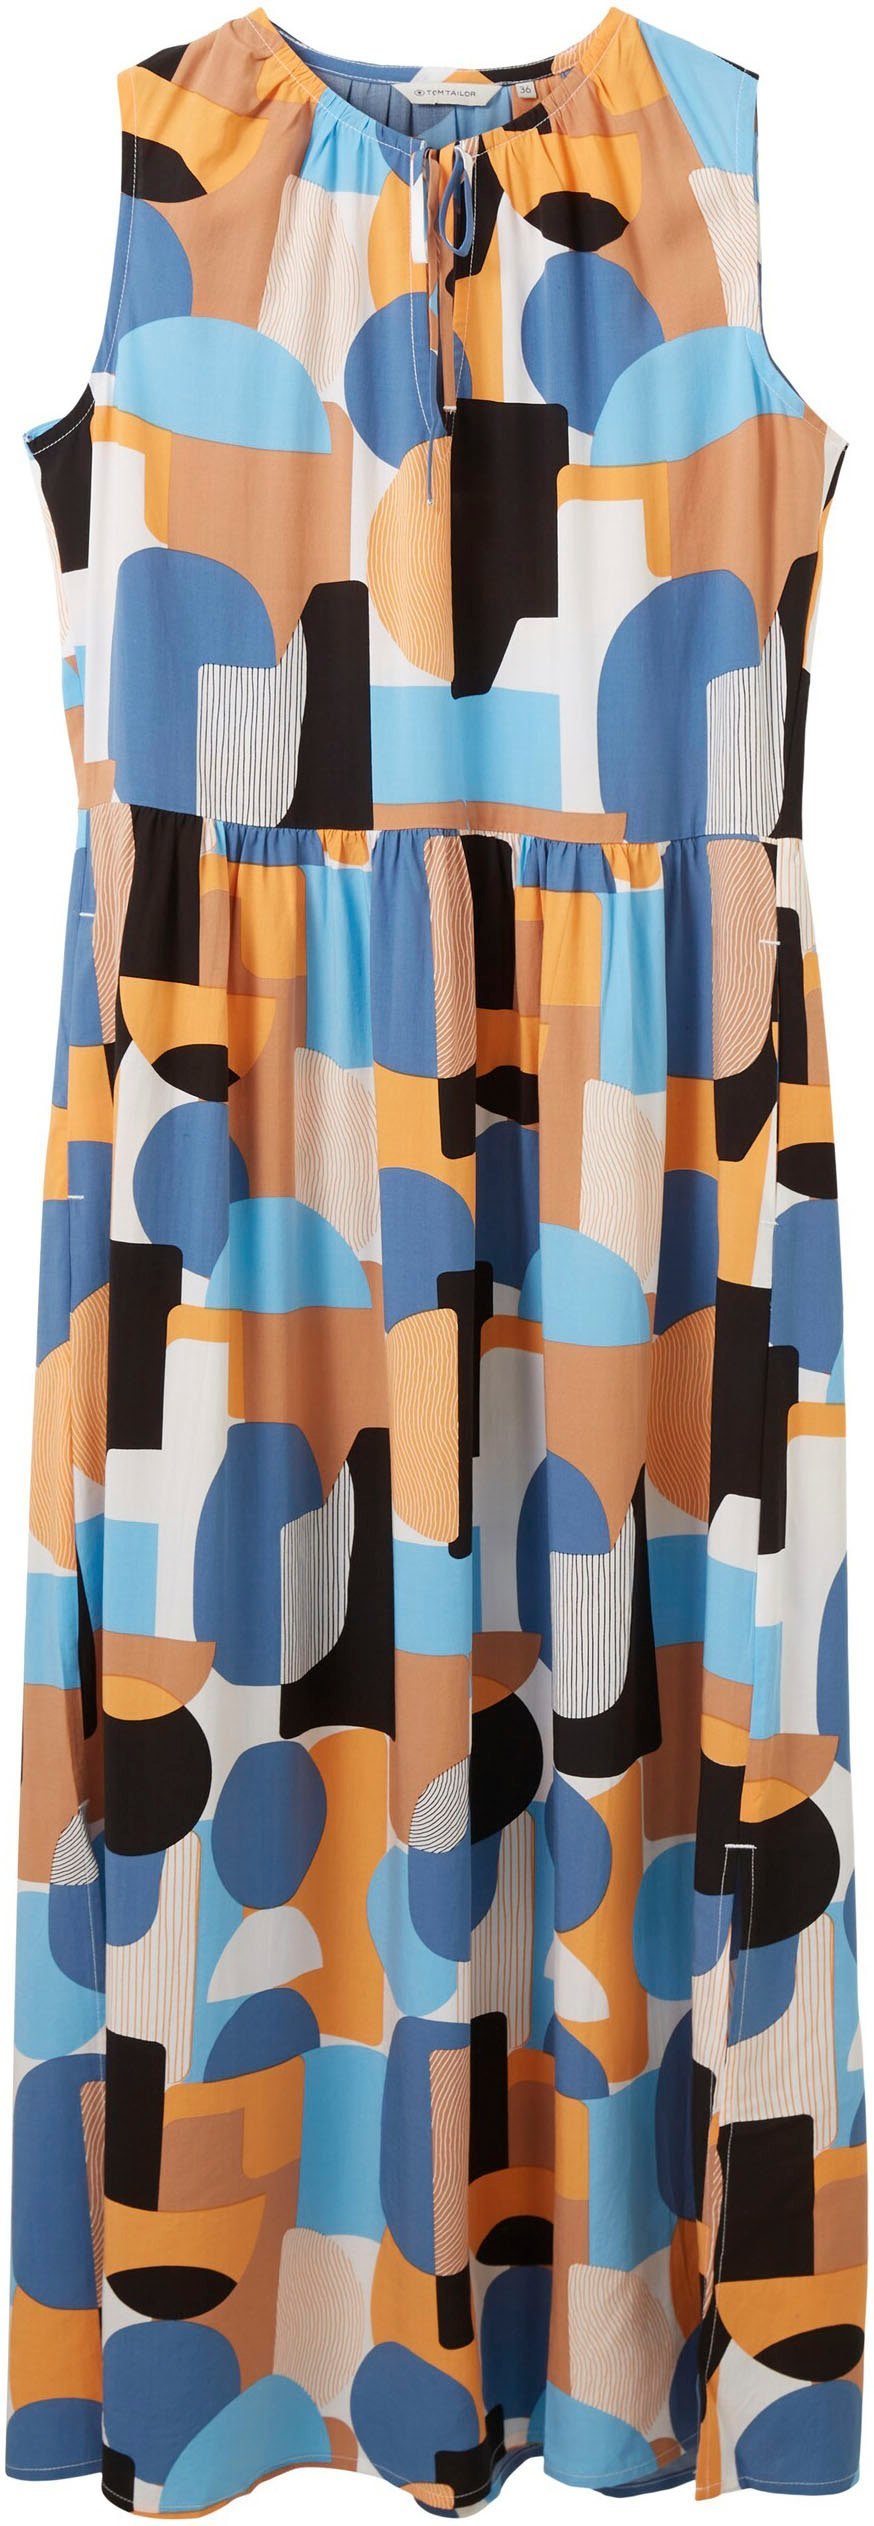 TOM TAILOR retro Volantkleid abstract shapes